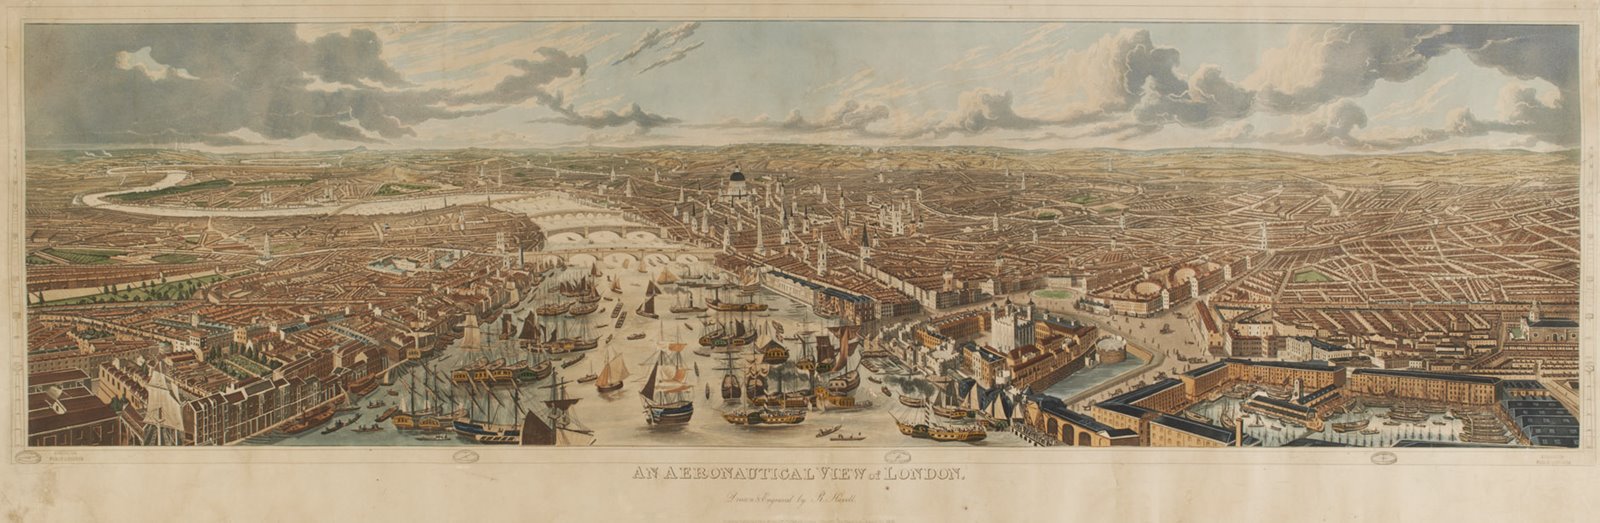 An Aeronautical View of London (Robert Havell Jr, 1832, hand-coloured engraving) is closely modelled on the Rhinebeck Panorama, though on a smaller scale. (ID no.: 81.635)